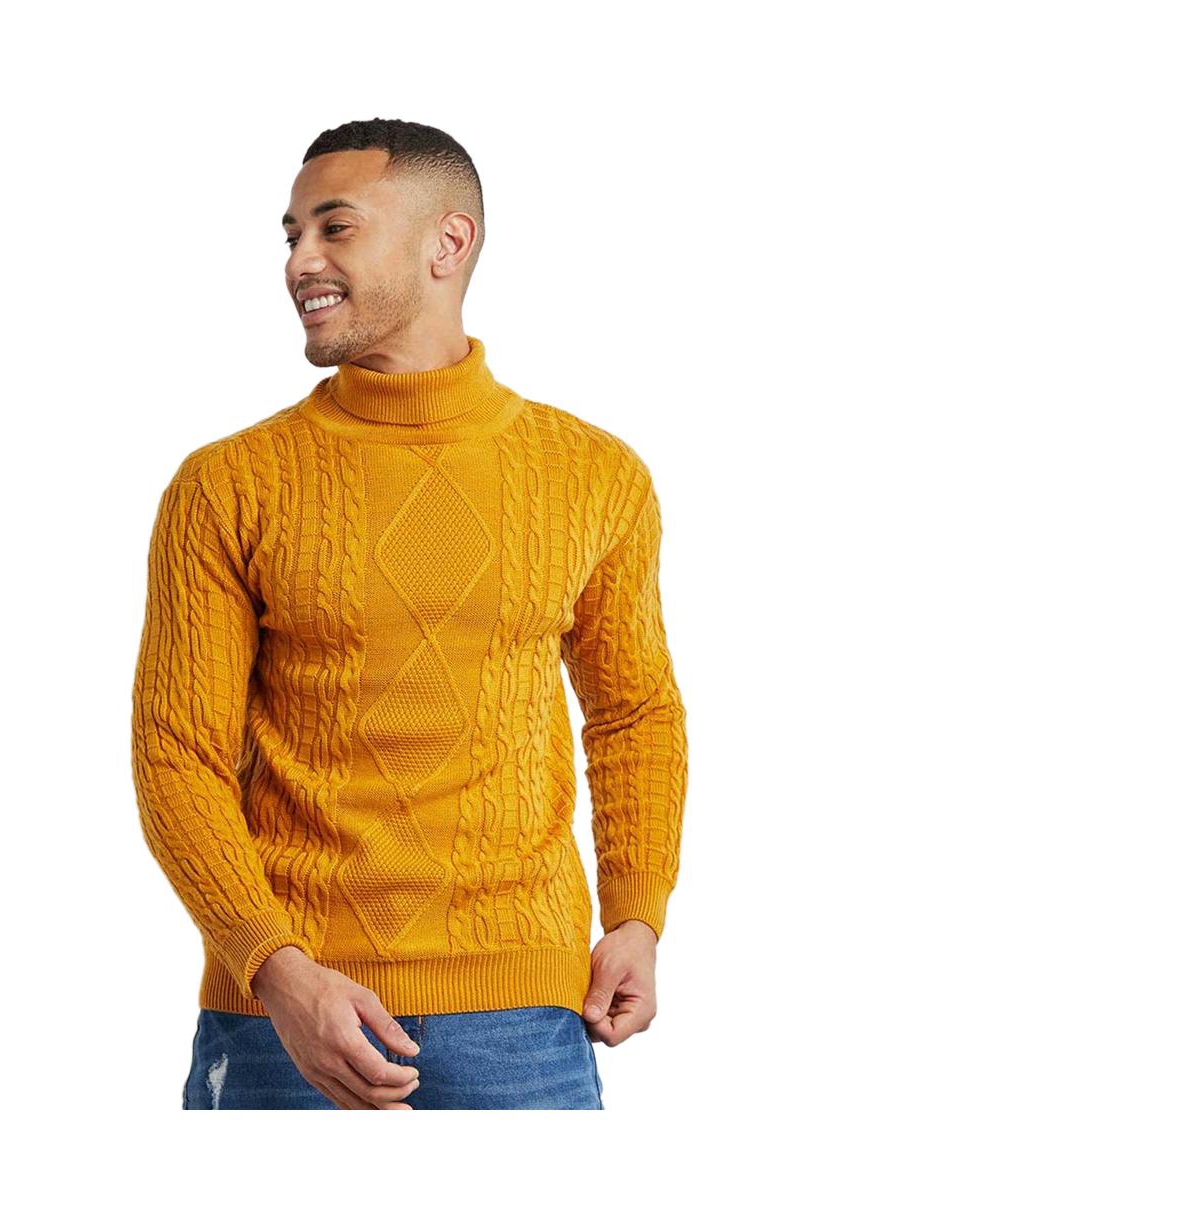 Men's Mustard Yellow Relaxed Cable-Knit Pullover Sweater - Mustard yellow